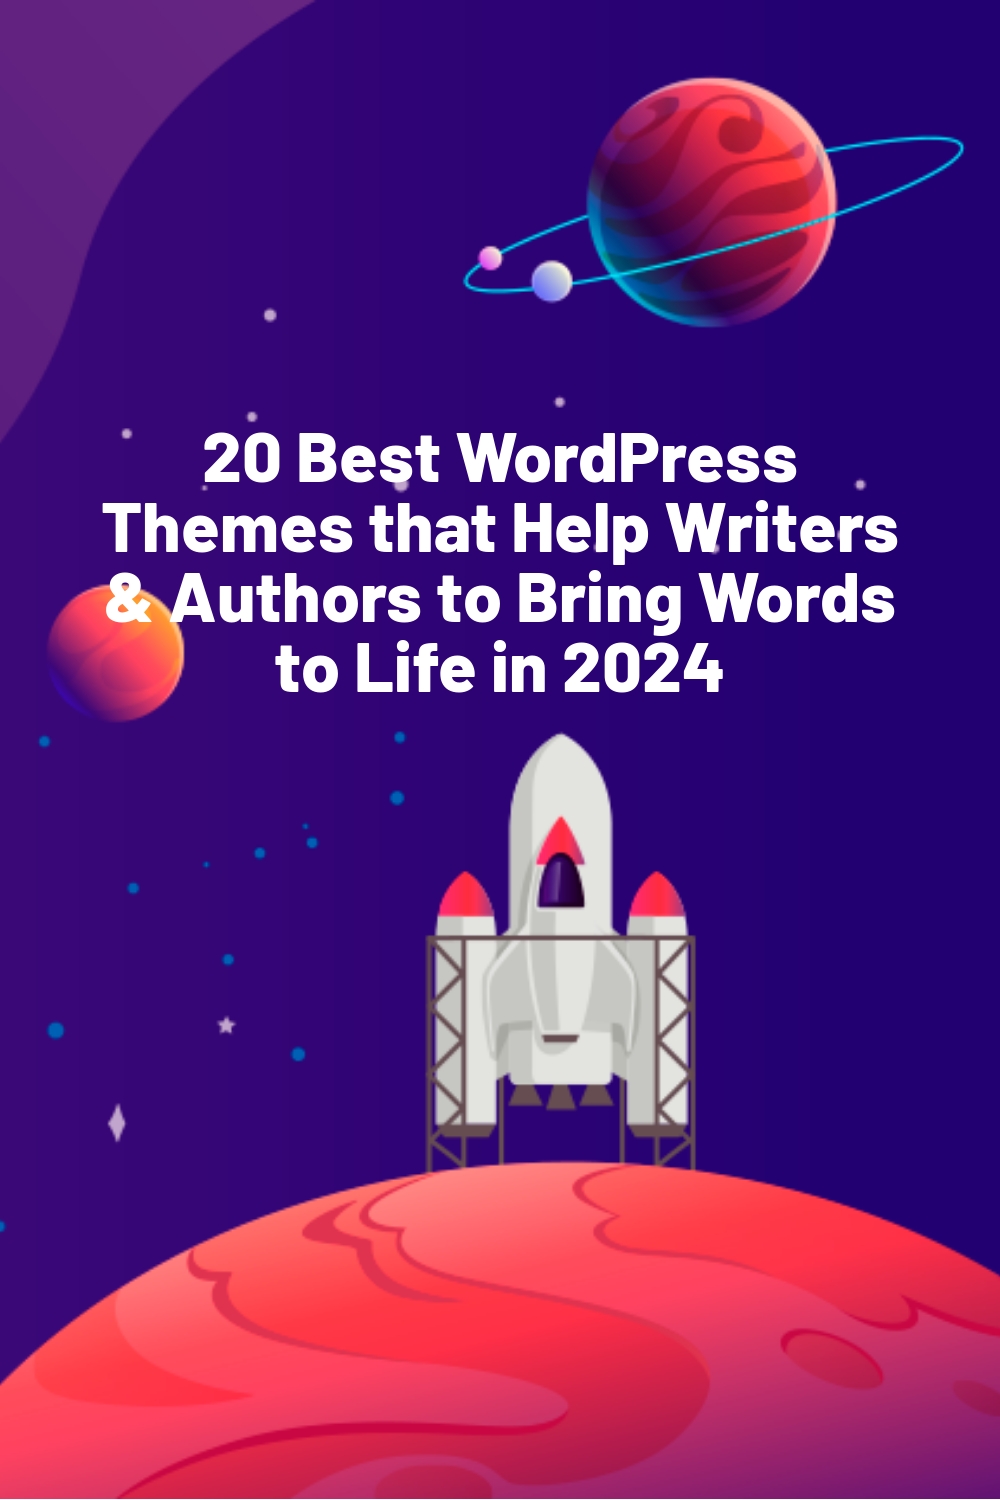 20 Best WordPress Themes that Help Writers & Authors to Bring Words to Life in 2024